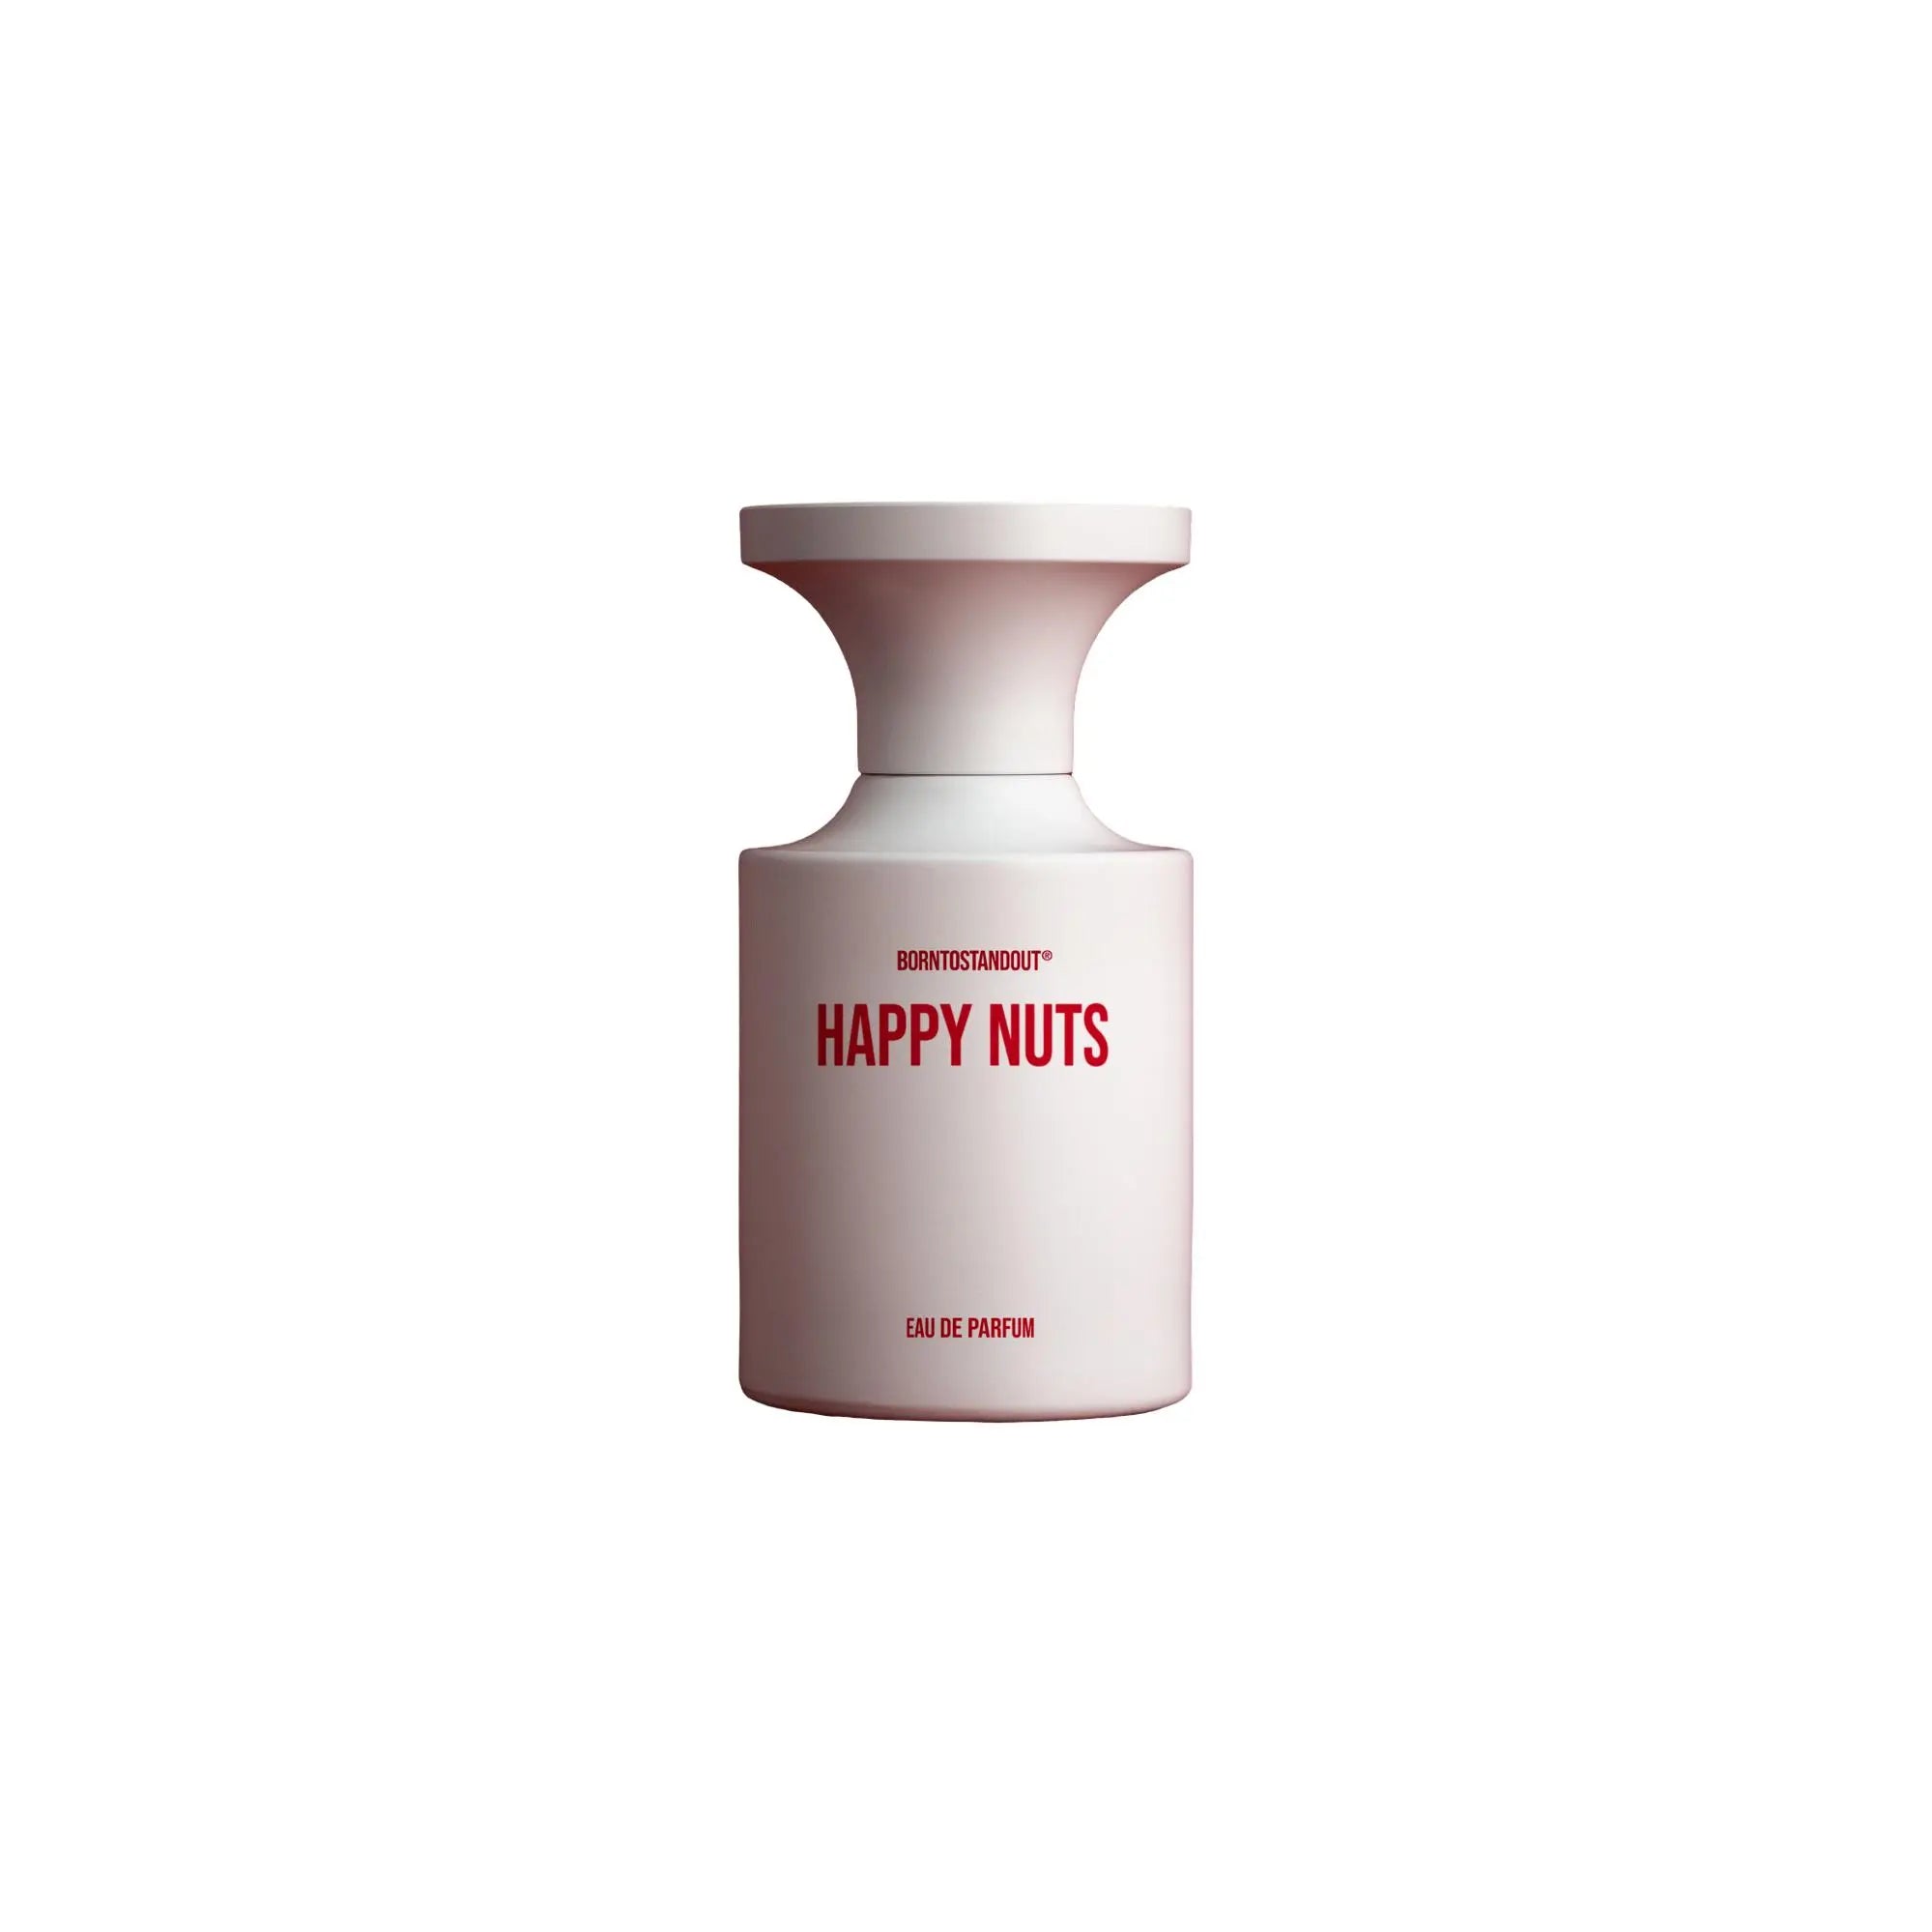 Born to stand out ハッピーナッツ - 50ml